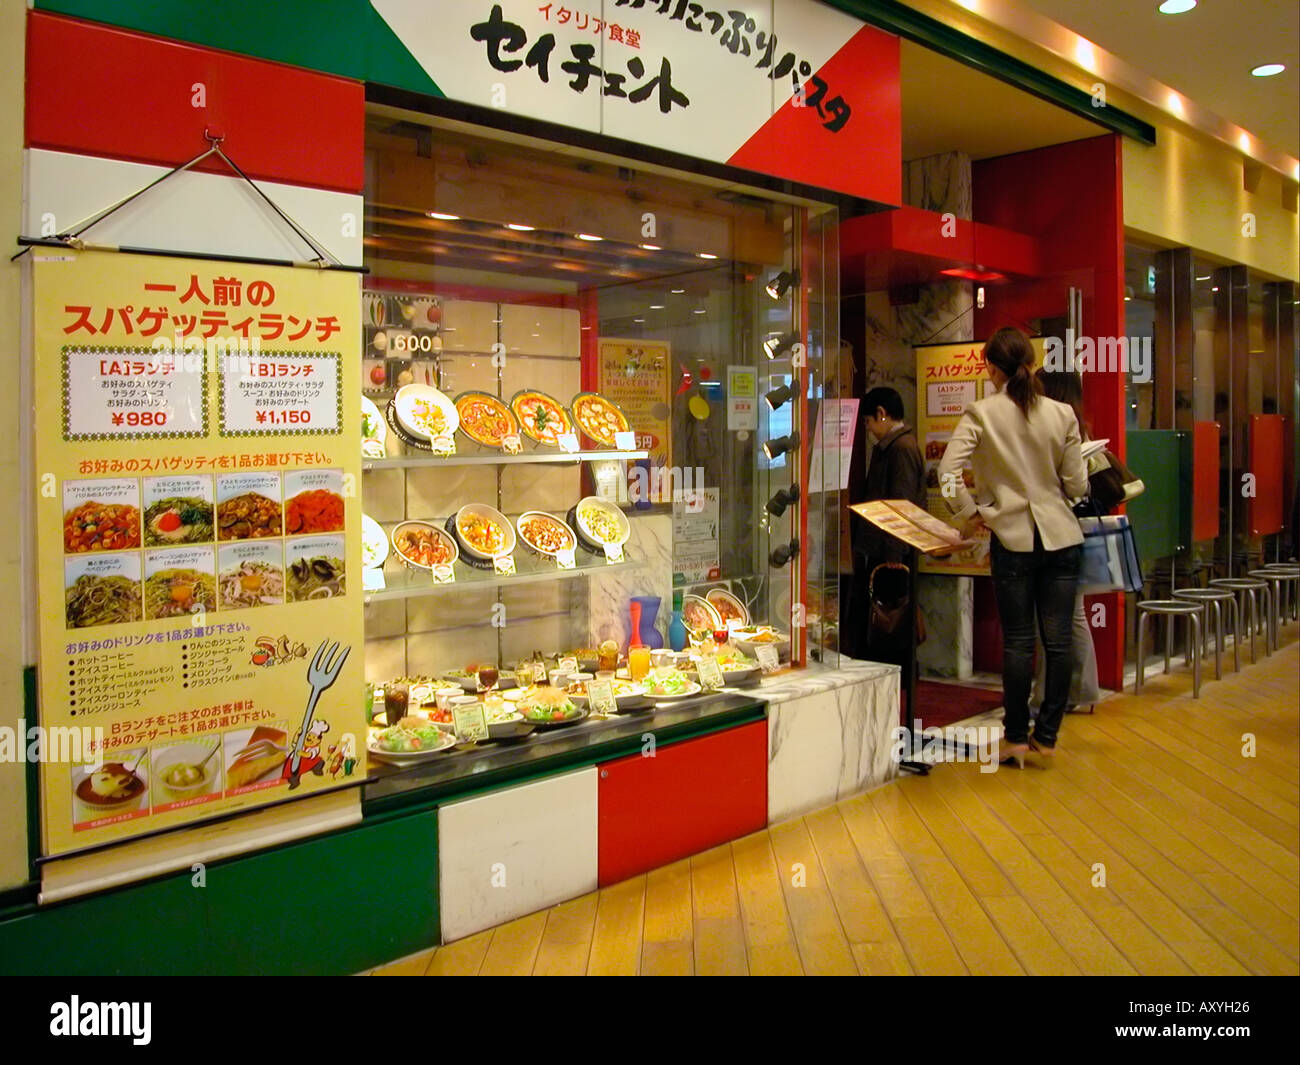 Window display of a pizza restaurant on the top floor of a Tokyo department store Japan Stock Photo